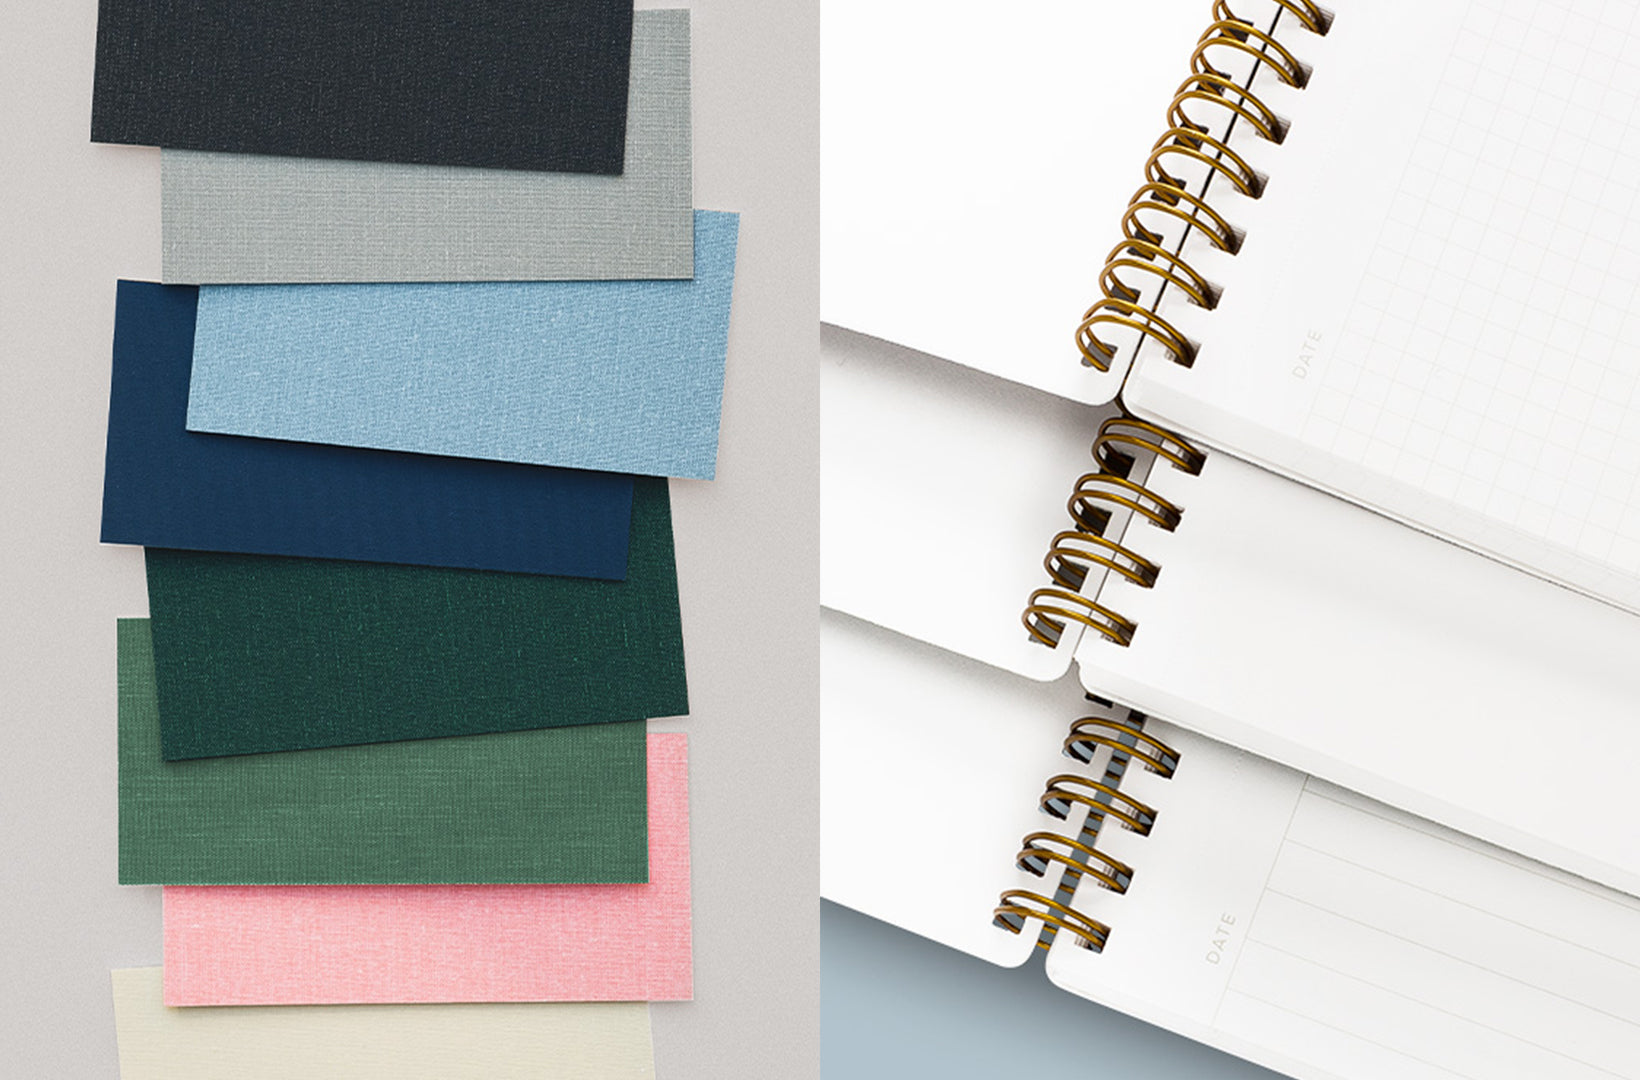 A side-by-side image shows Appointed bookcloth square swatches in varying colors on the left, and three stacked open notebooks with brass wire-o binding that display the interior lined, grid, and blank options.